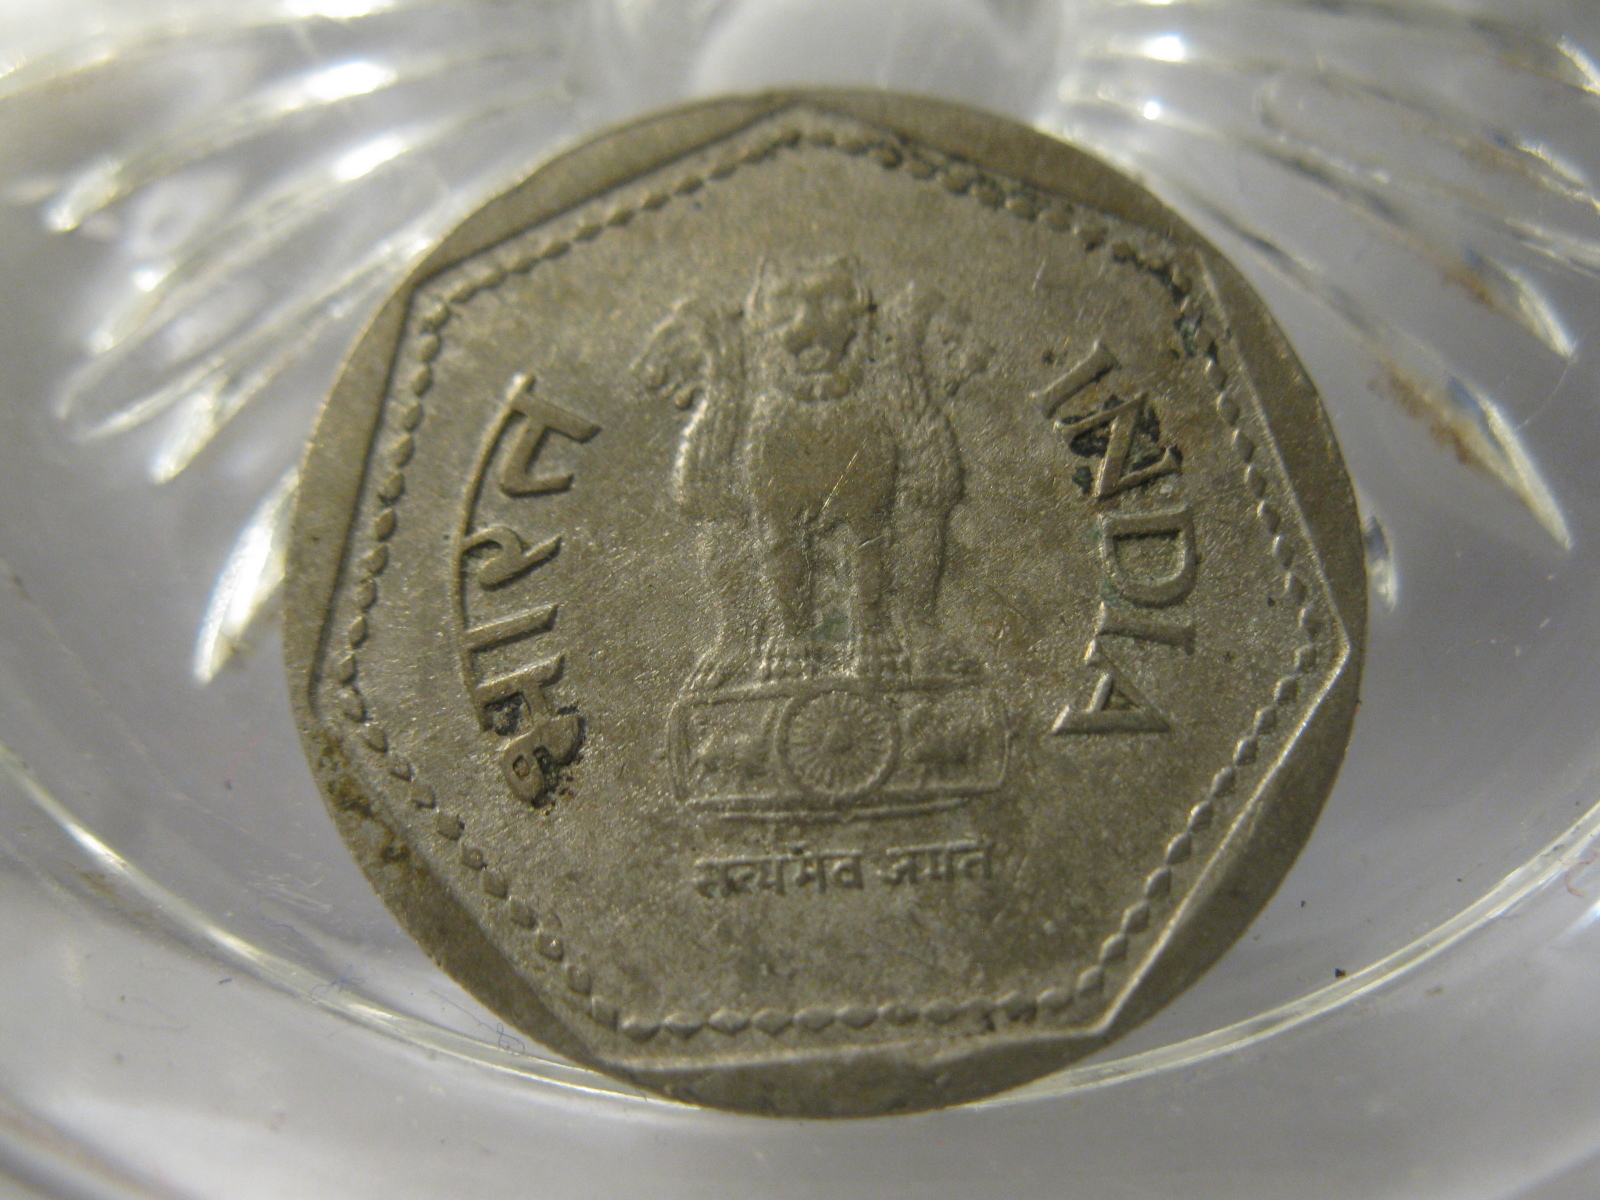 Primary image for (FC-242) 1985 India: 1 Rupee - Llantrisant mint